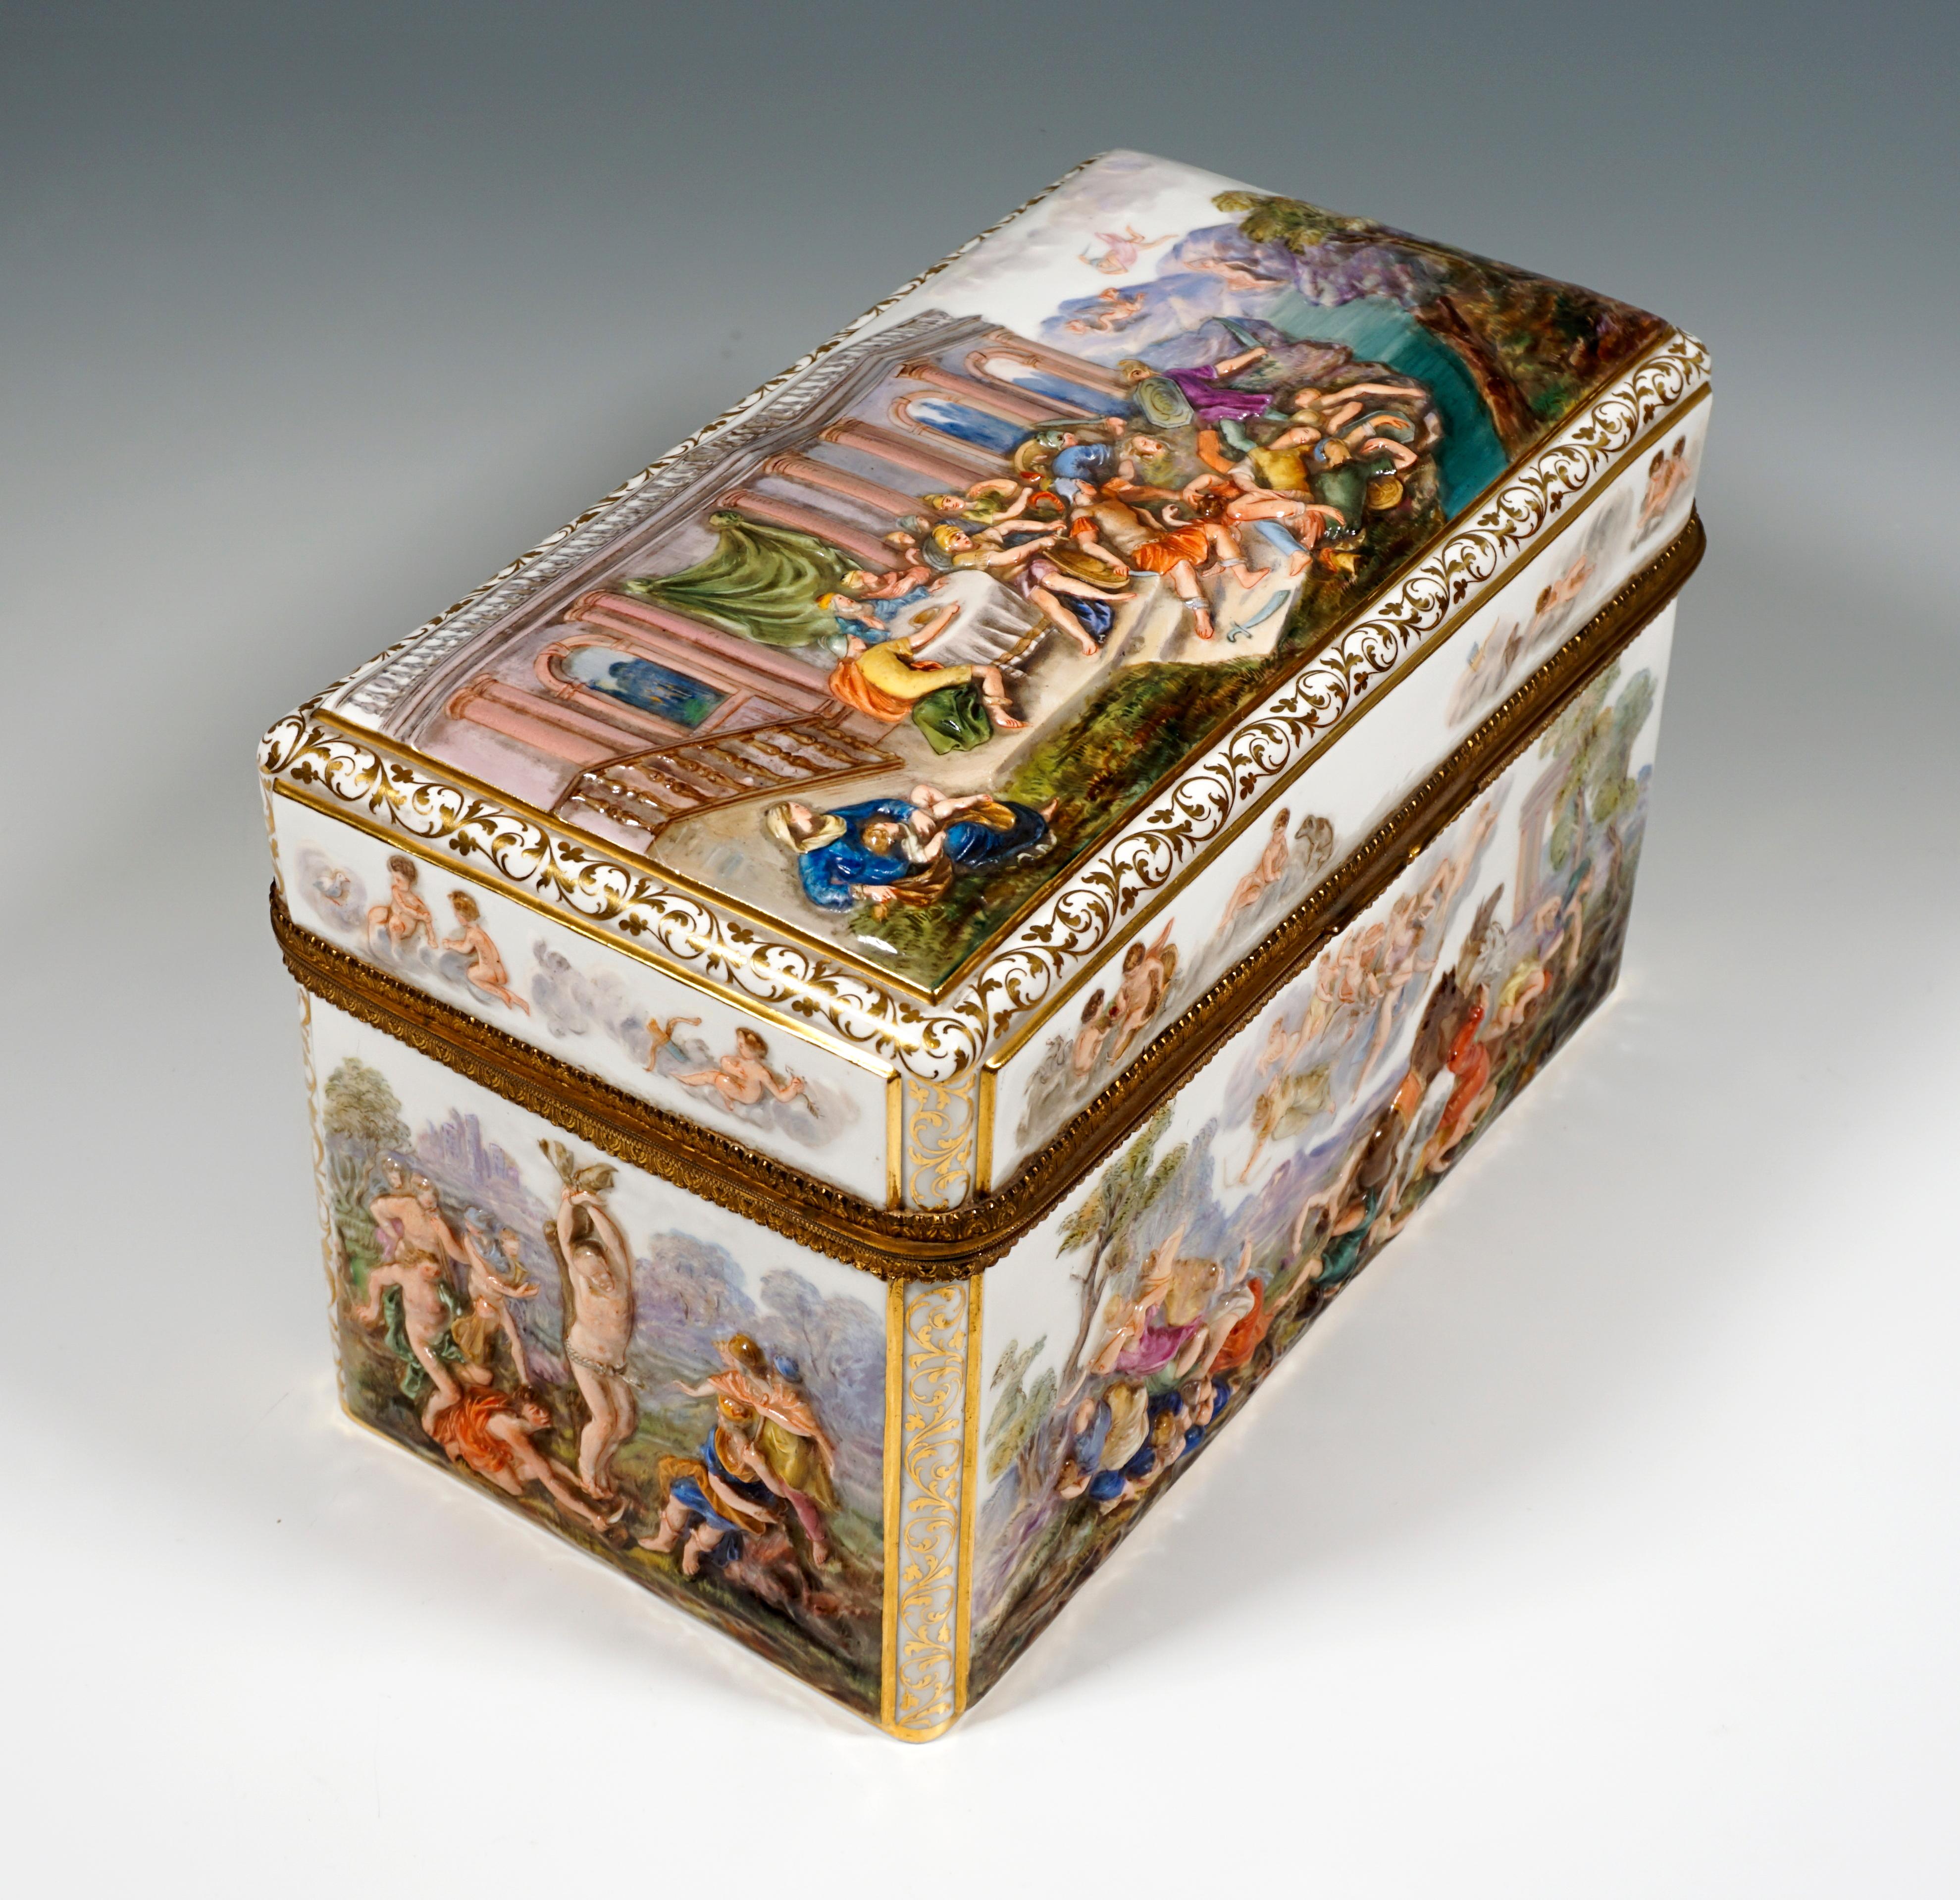 Very rare early Meissen item:
Large jewelry box in the style of Capodimonte on a rectangular floor plan, with all-round, strongly colored relief depictions from Greek mythology, such as the 'Crucifixion of Marsias', or the 'Story of the King's Son